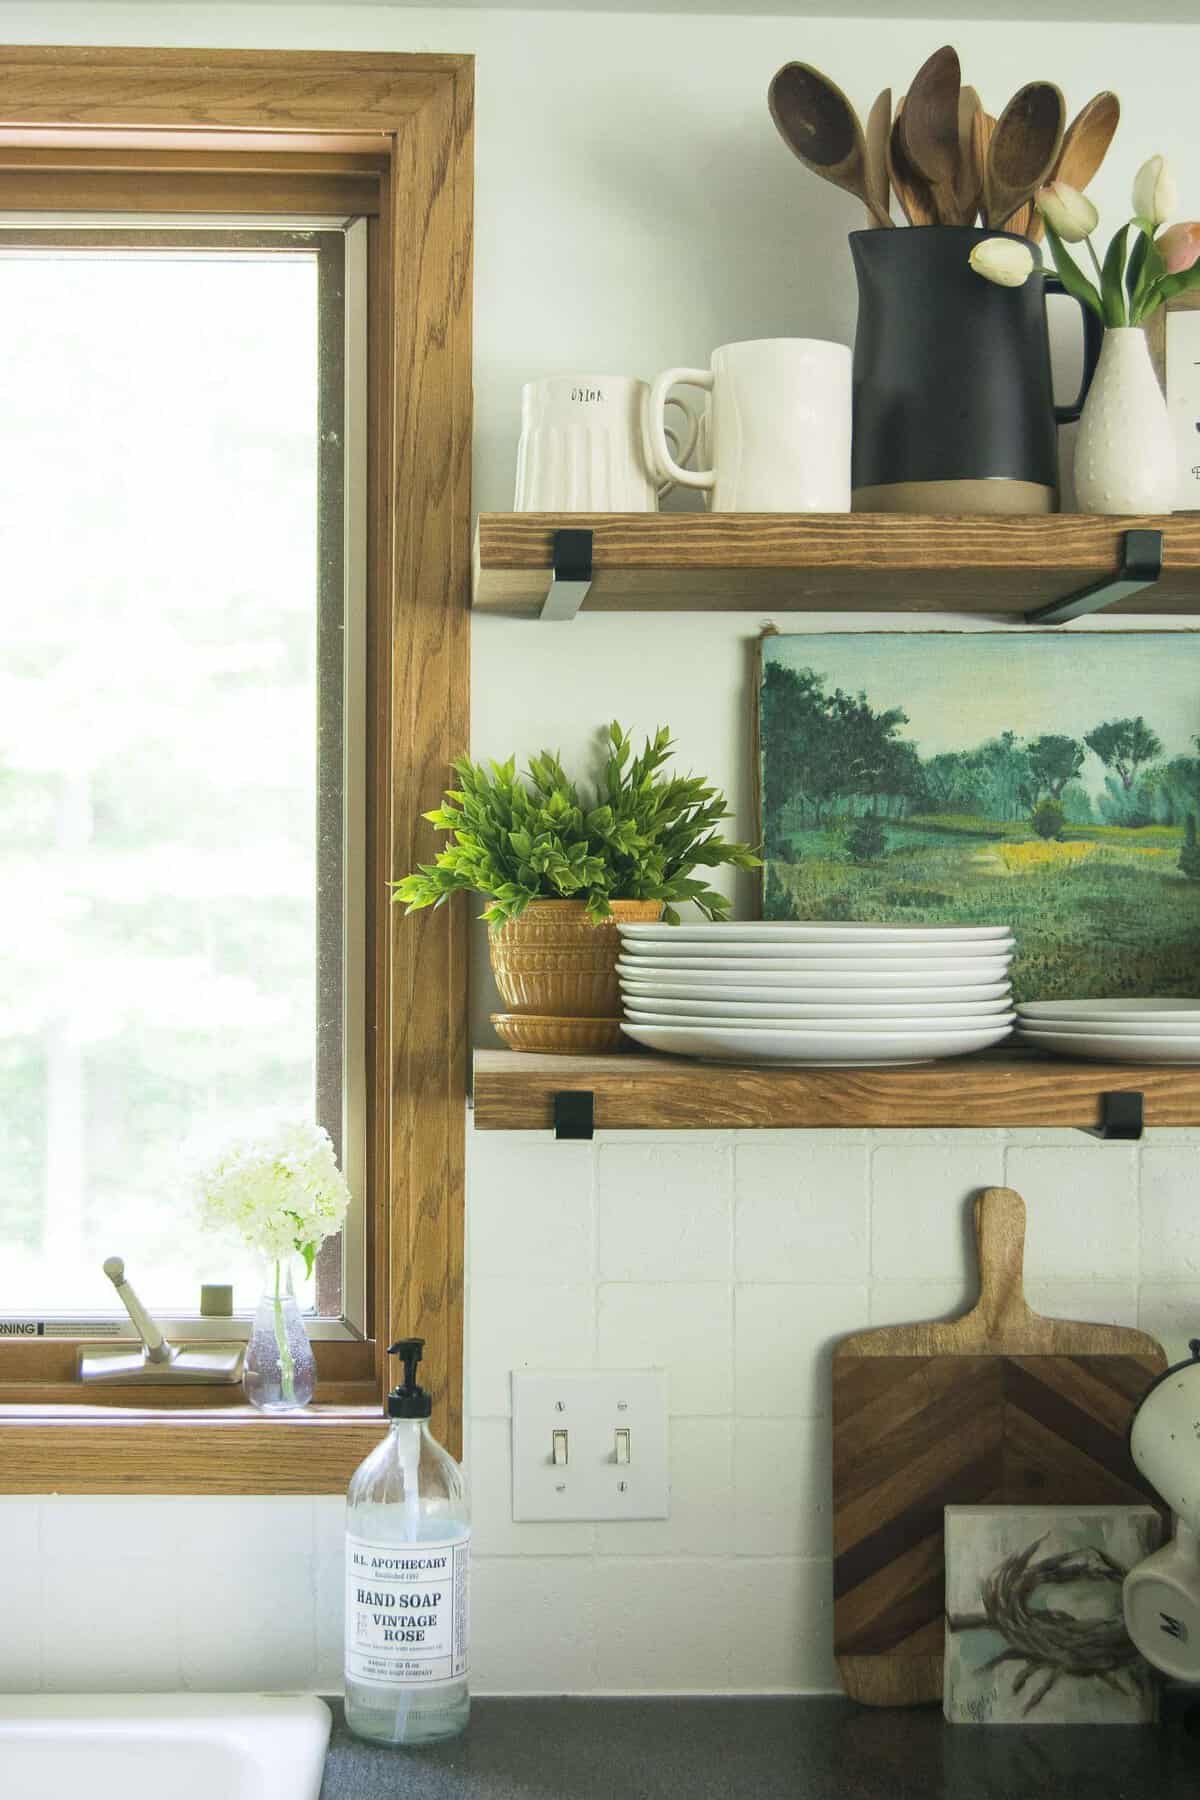 Diy Open Shelving Tutorial With Free, How To Build Open Shelving In Kitchen